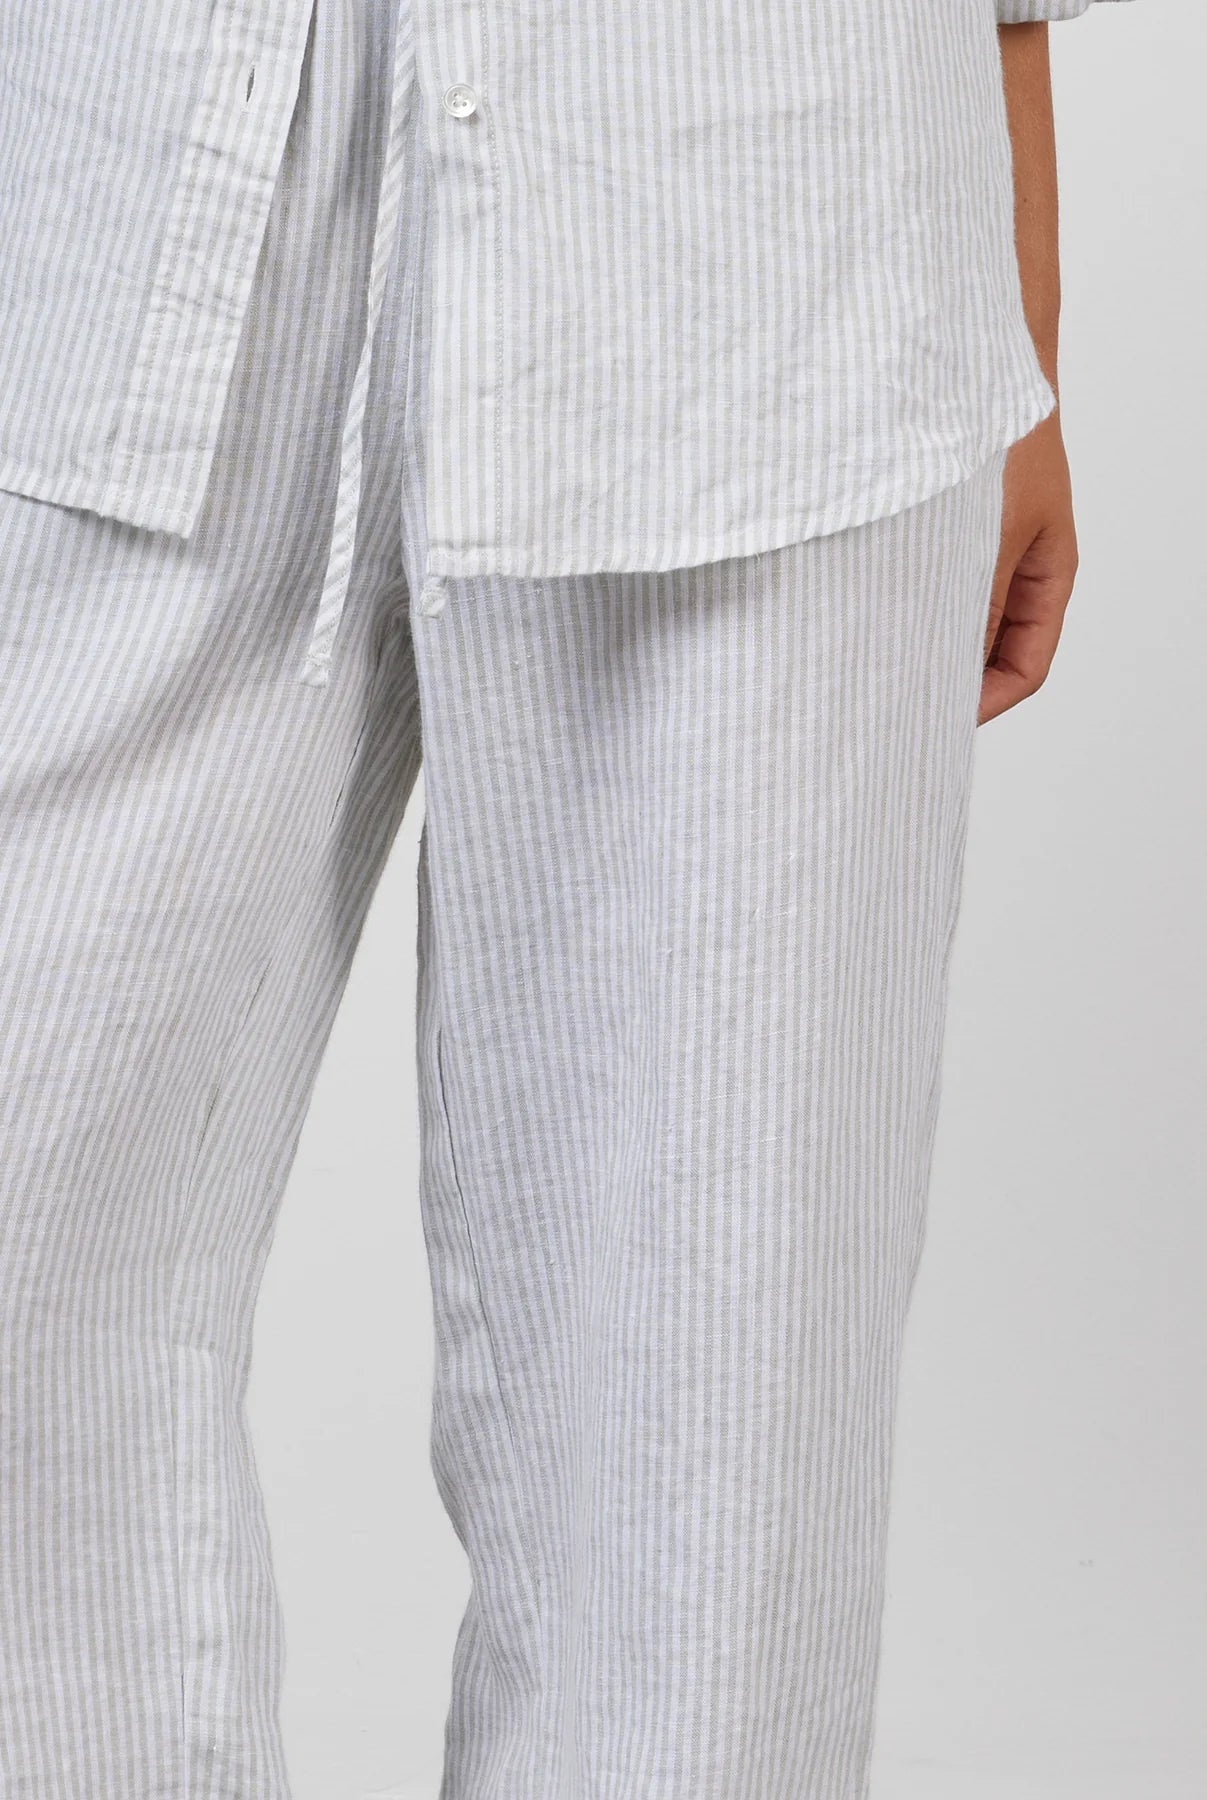 Rory Linen Pant in Navy